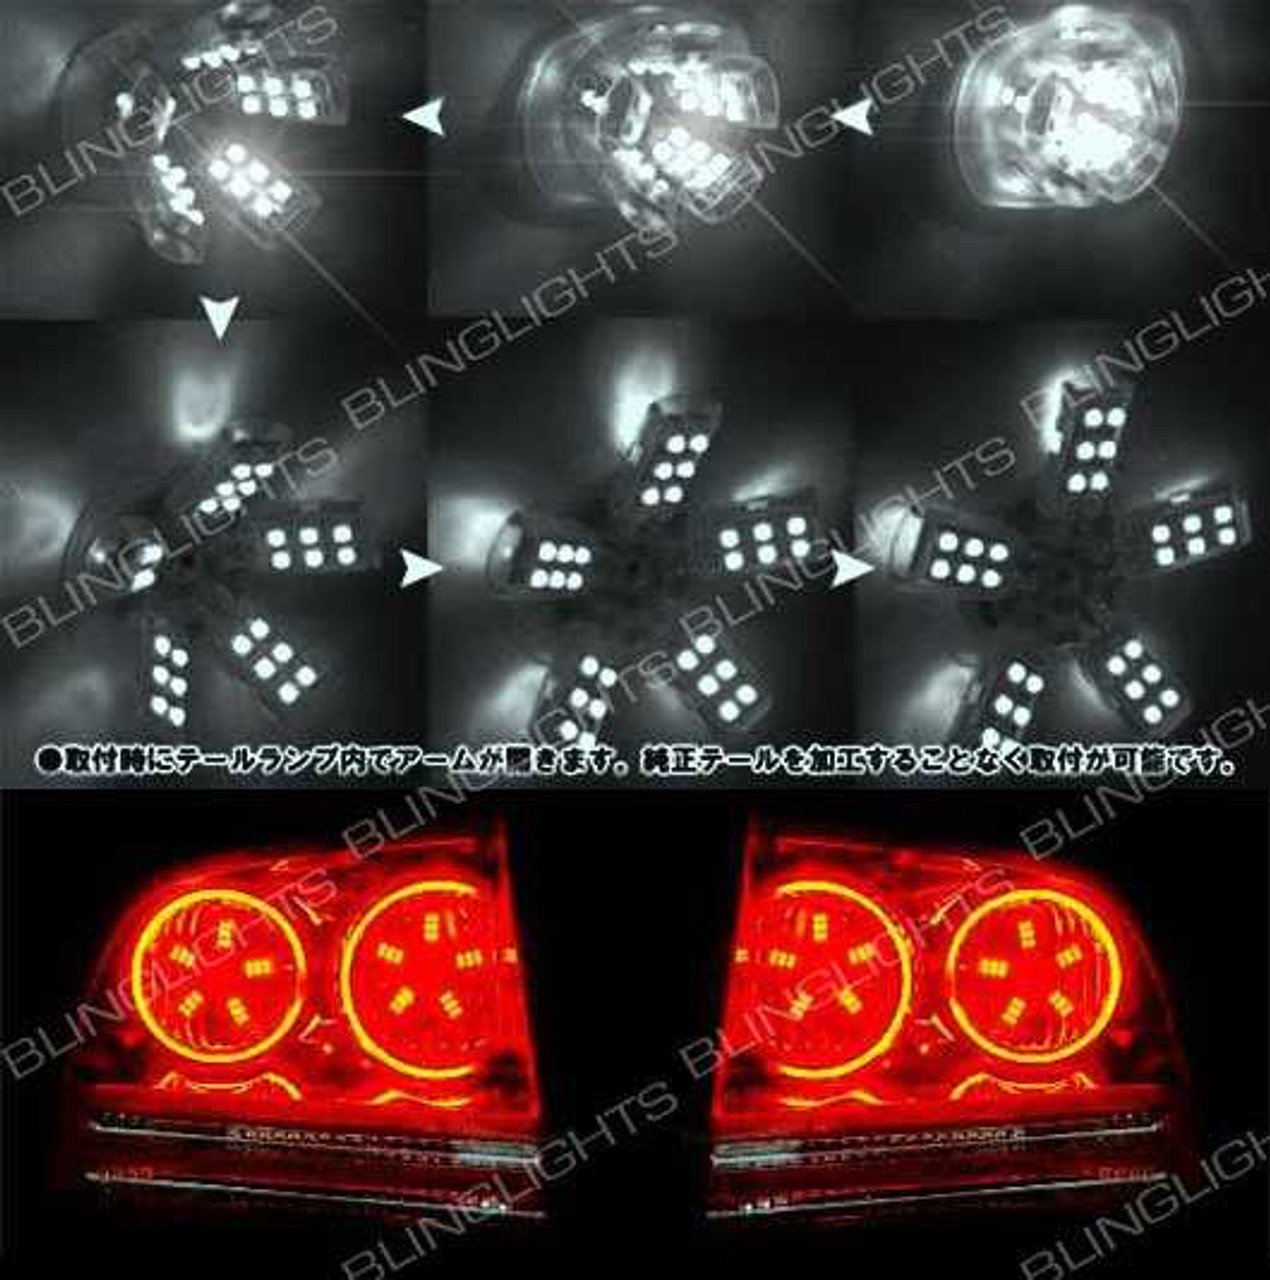 Audi A3 Tail Lamps Custom White Spider Light Bulbs Replacement Upgrade Set Pair